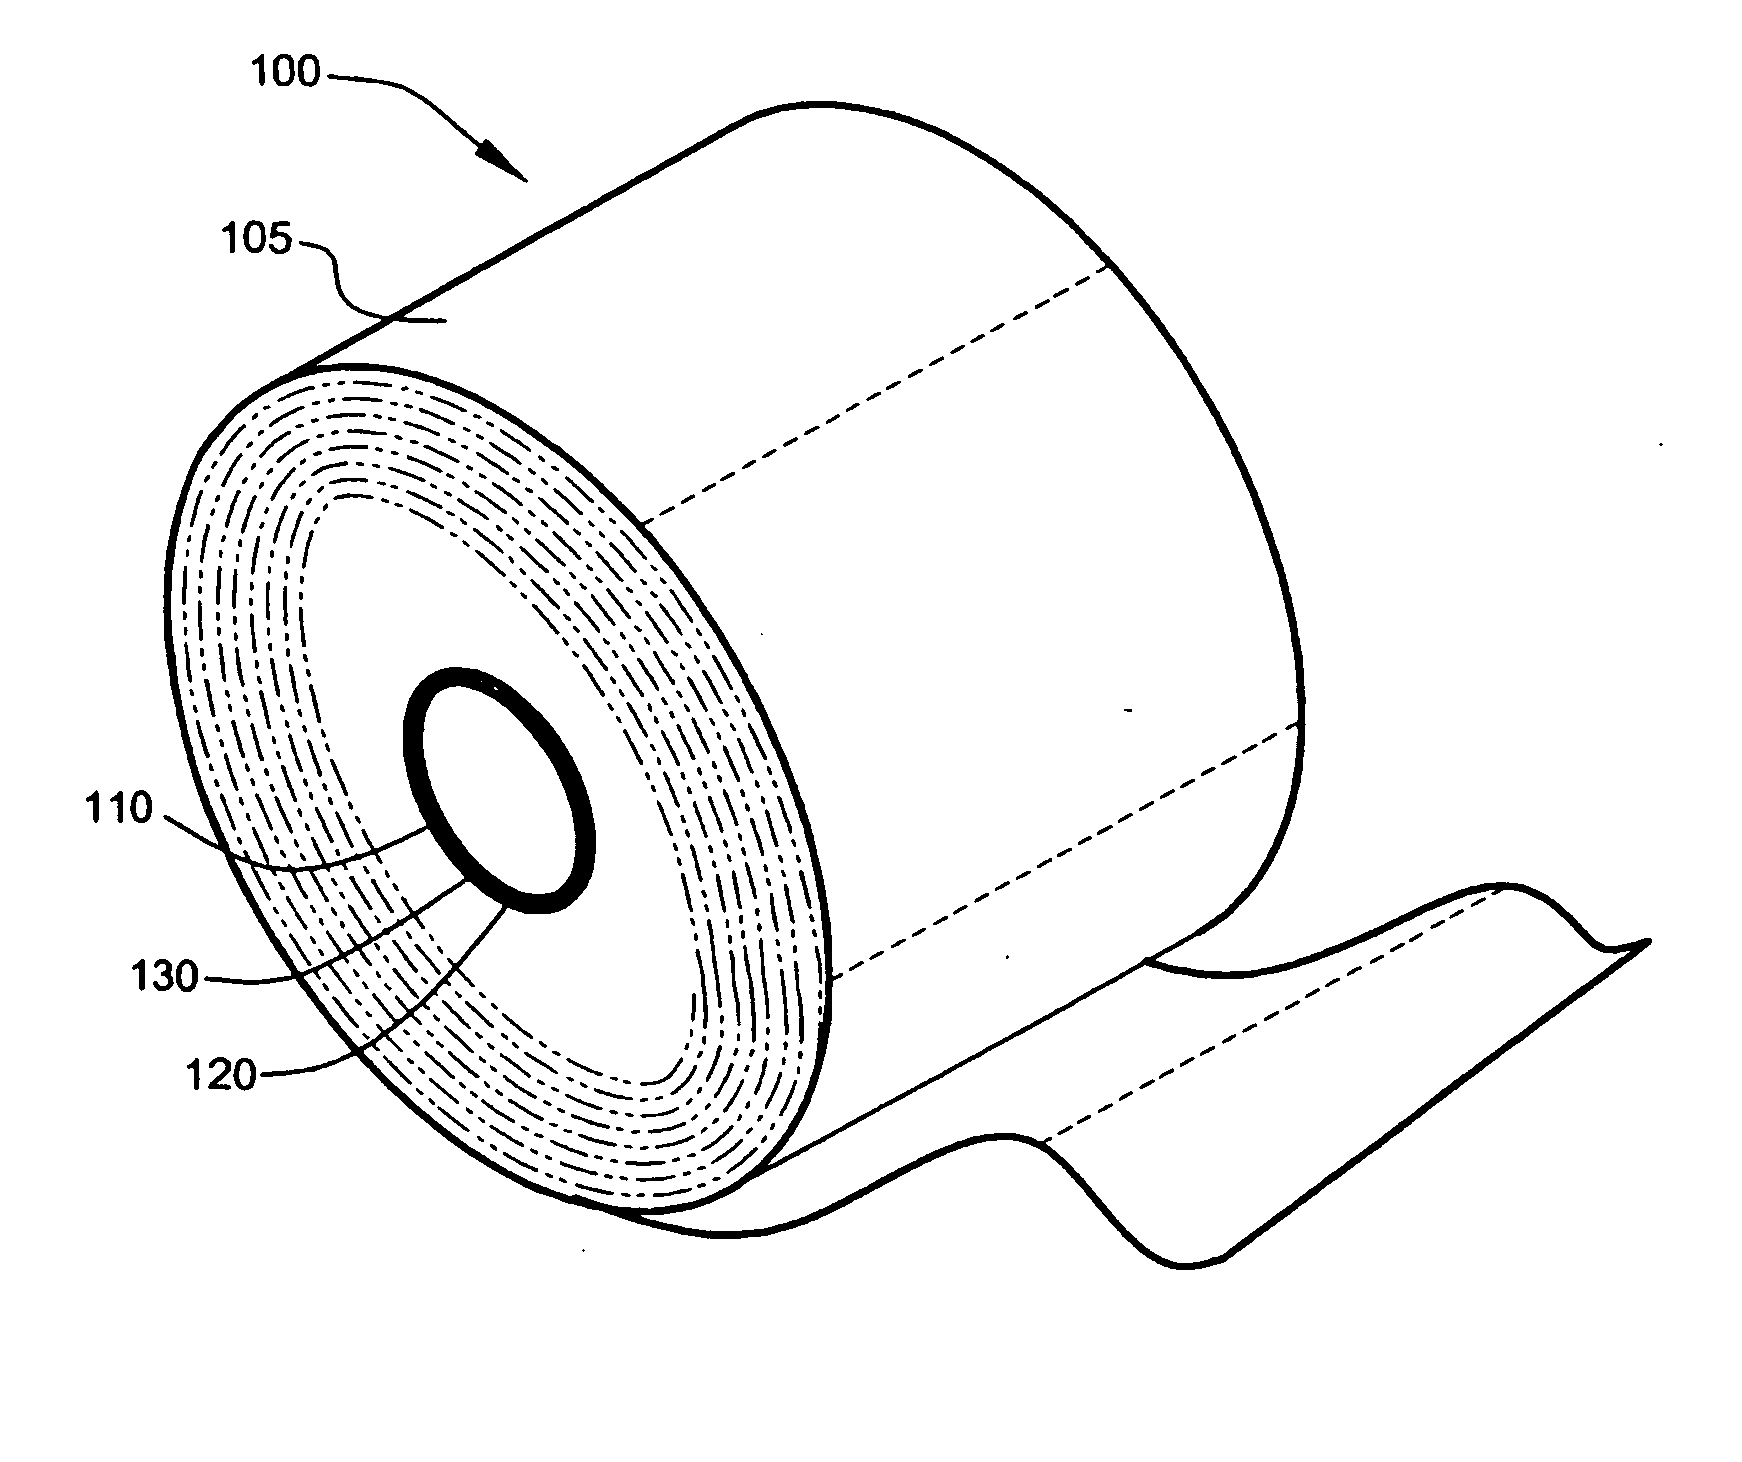 Dispensing paper-roll core systems